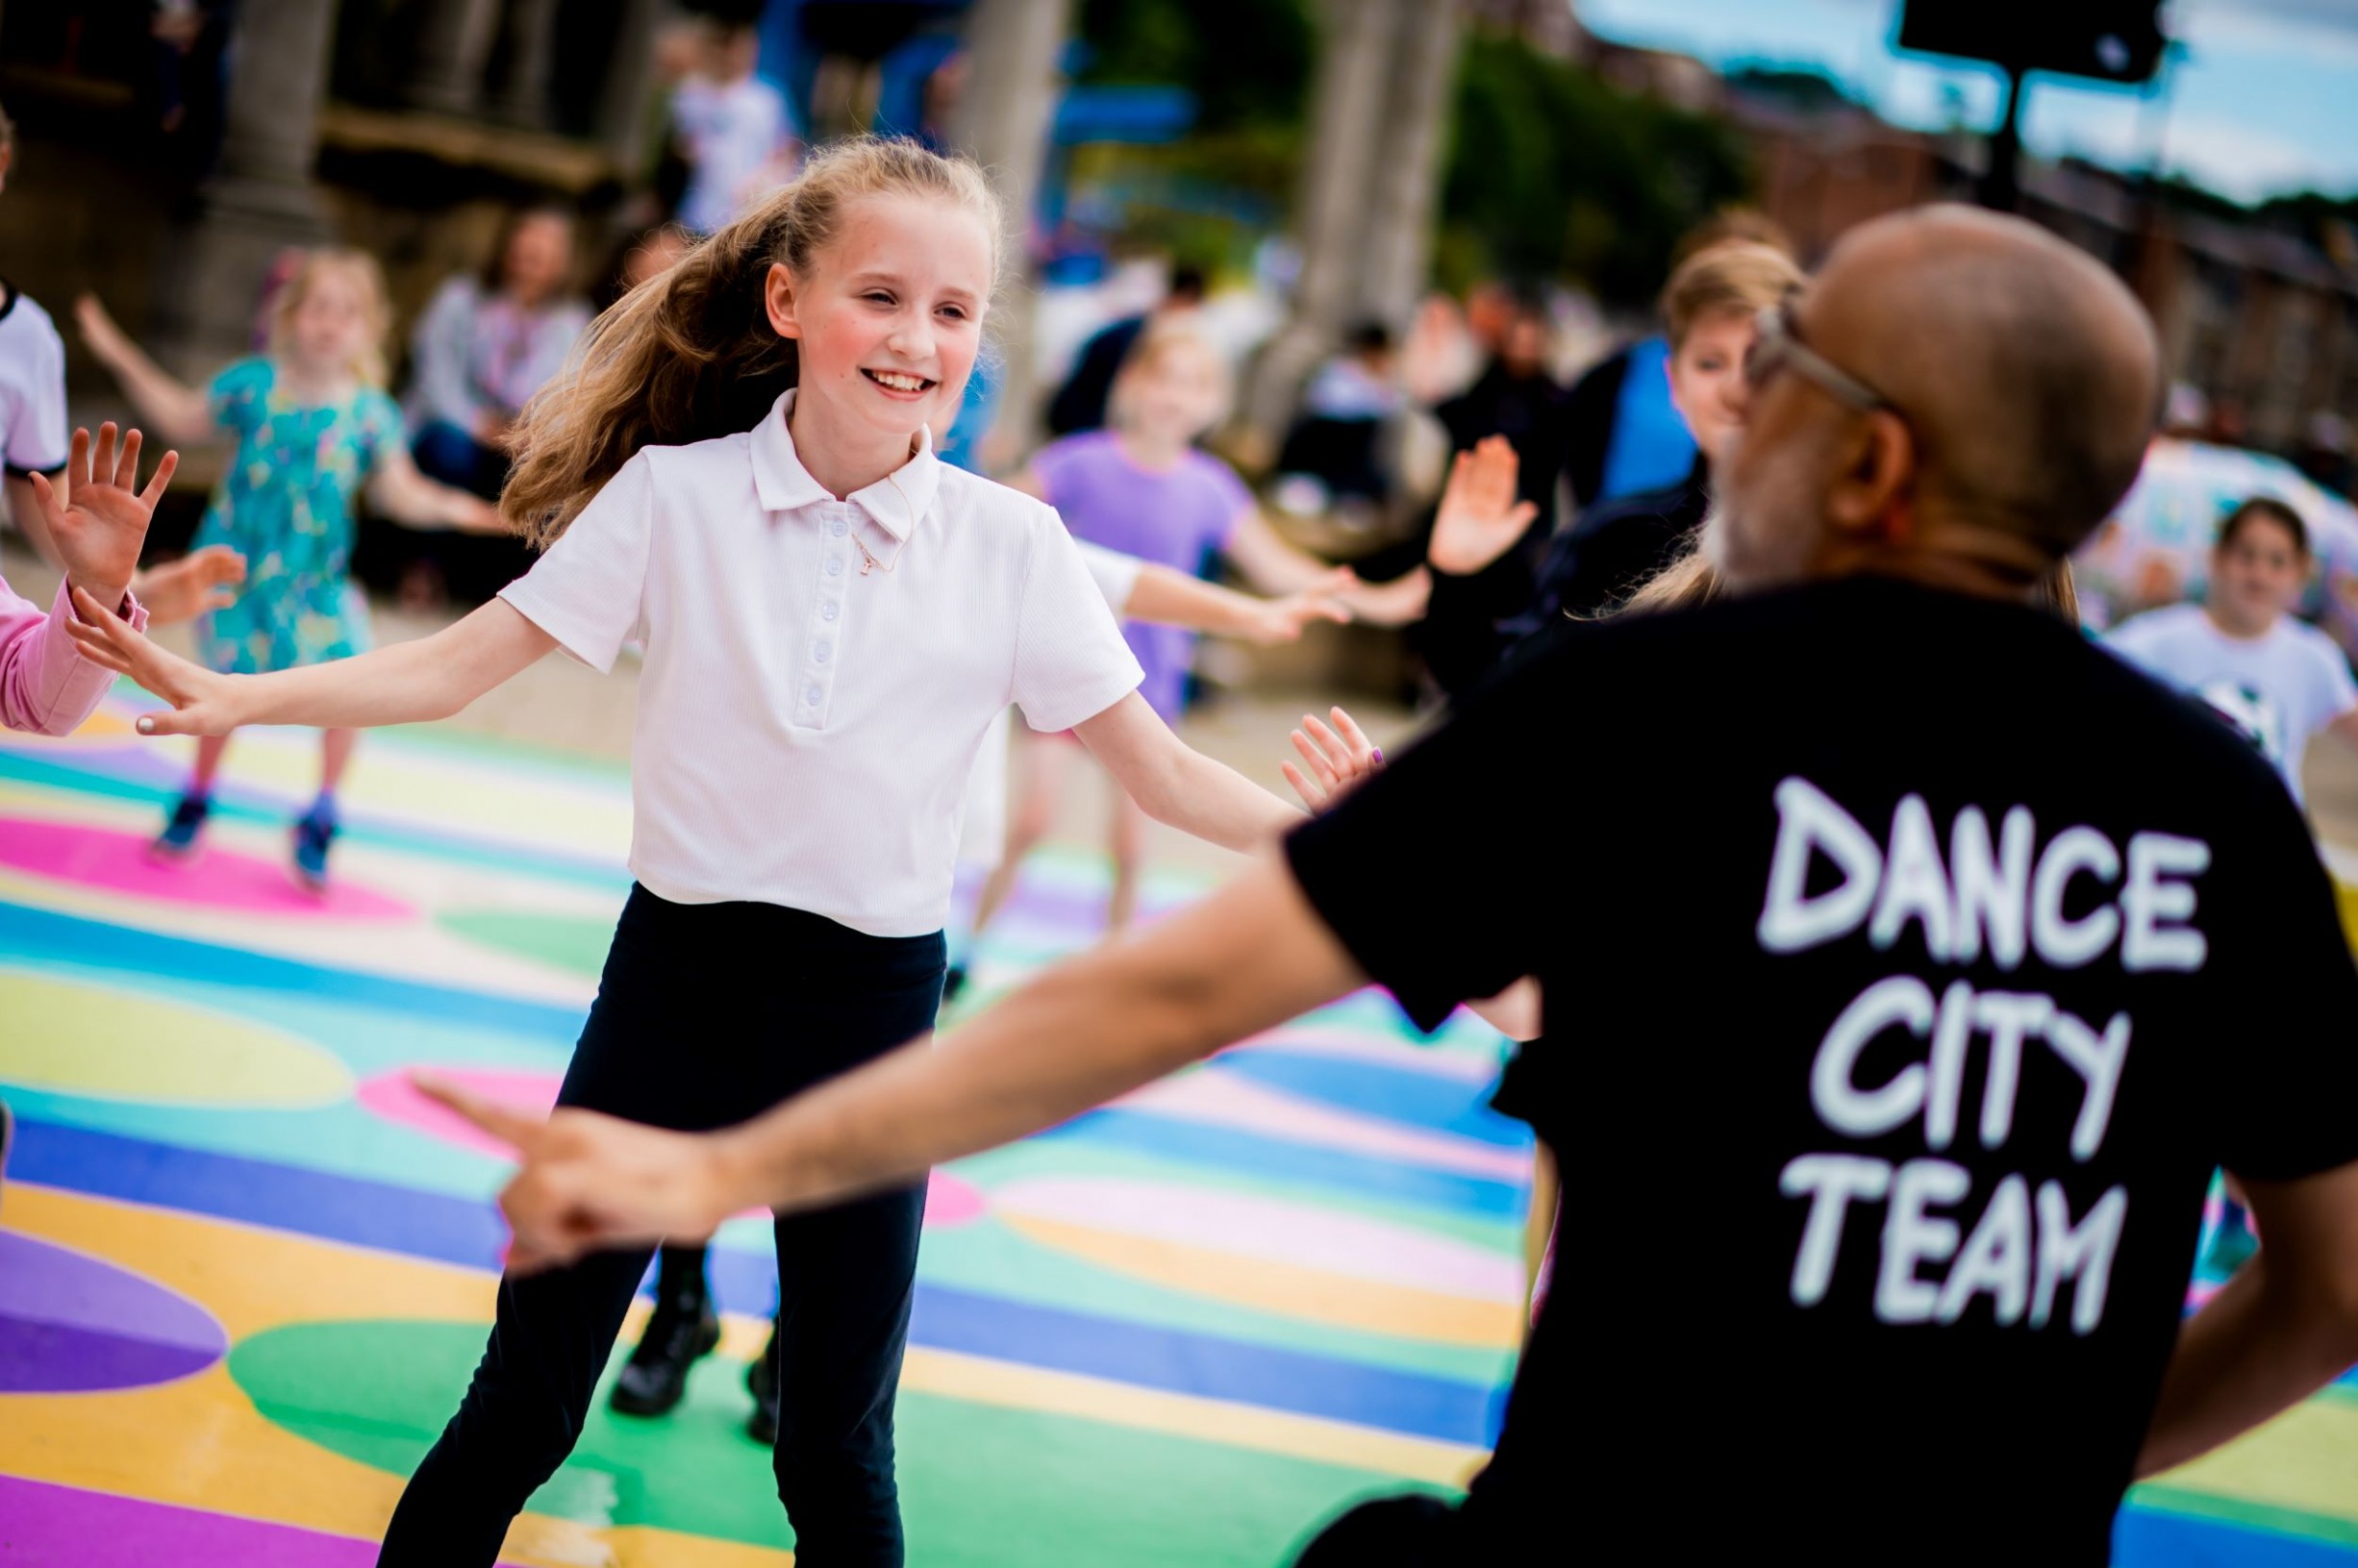 A dance class for kids hosted by Dance City